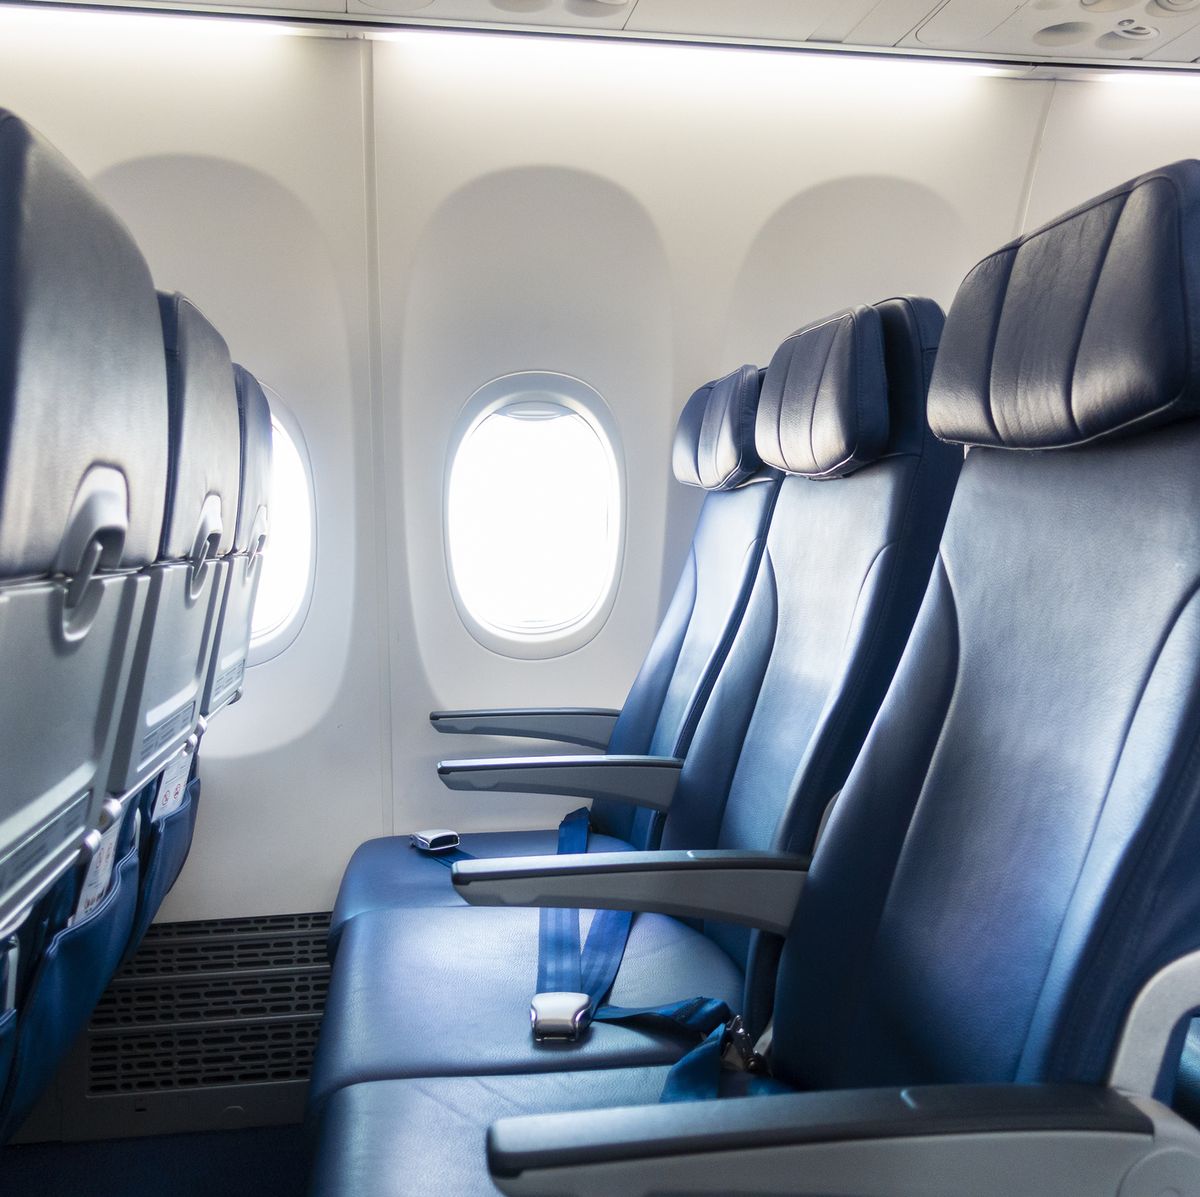 How to Clean Airplane Seats - How Do You Disinfect an Airplane Seat?